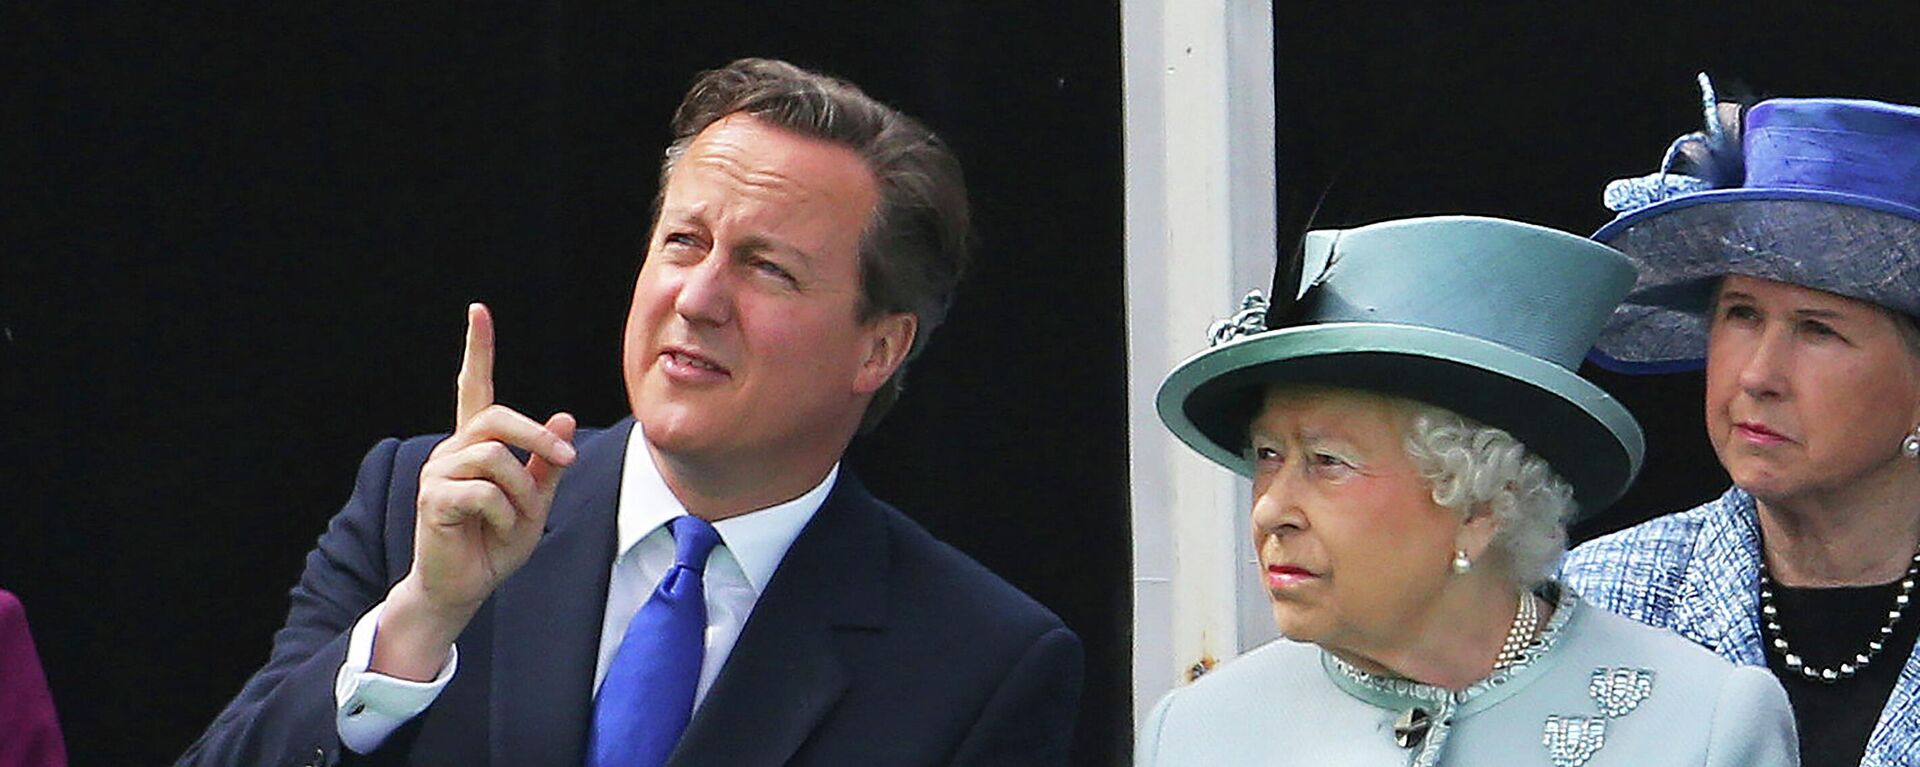 FILE - Seated near the Magna Carta memorial at Runnymede, England, are Prime Minister David Cameron, and Queen Elizabeth II, ahead of a commemoration ceremony Monday June 15, 2015, to celebrate the 800th anniversary of the groundbreaking accord called Magna Carta. - Sputnik International, 1920, 14.11.2023